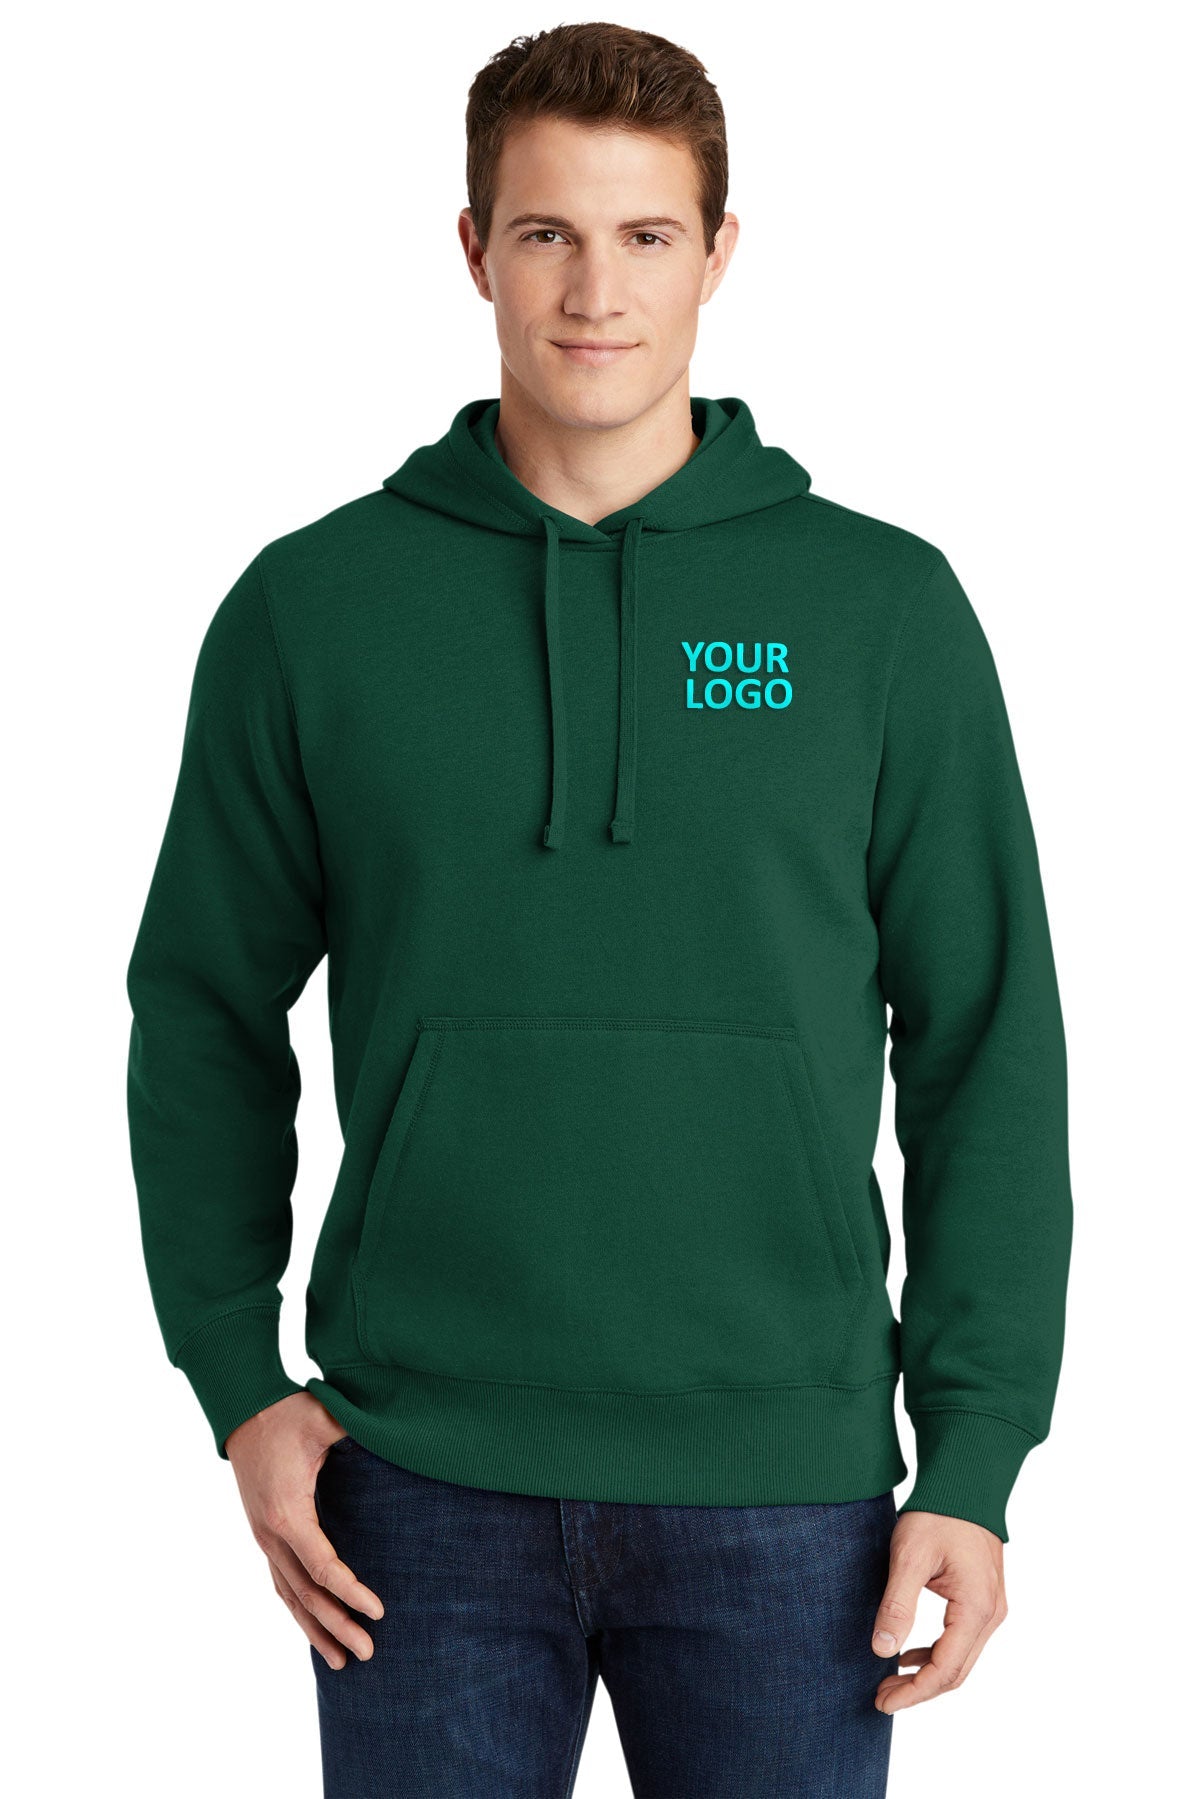 Sport-Tek Forest Green ST254 sweatshirts with logo embroidery